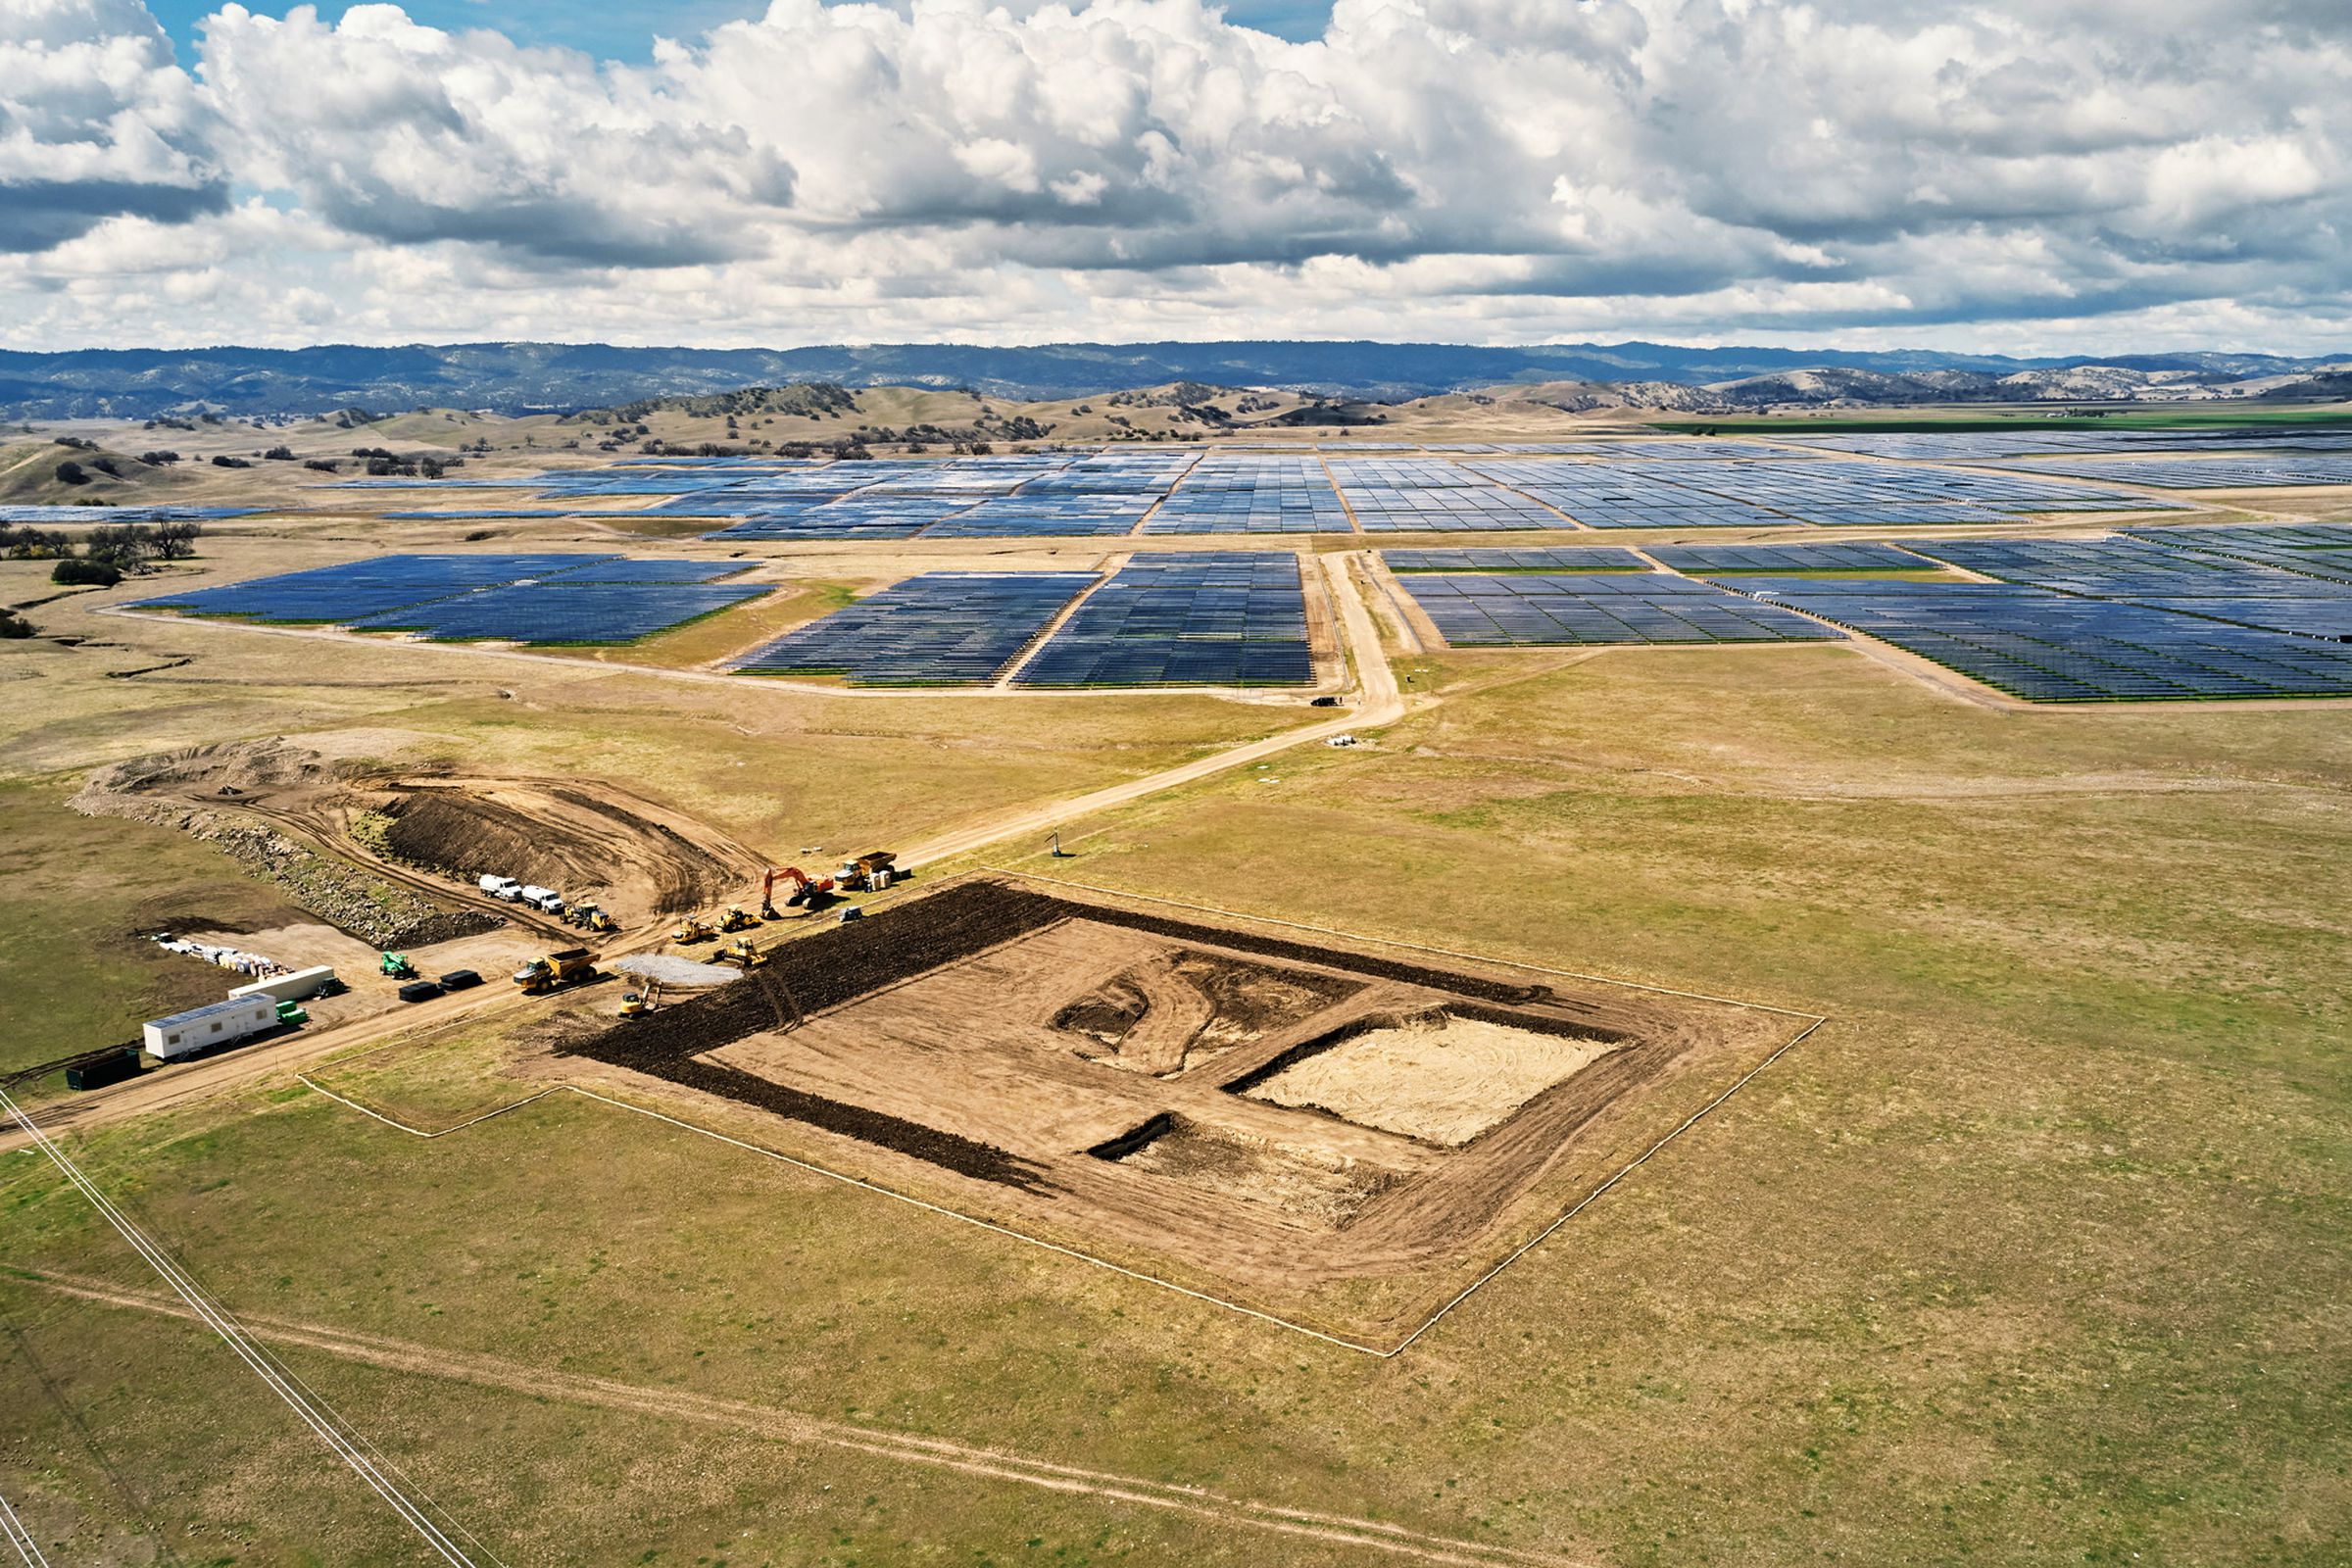 The construction site of the energy storage project at the California Flats solar farm.